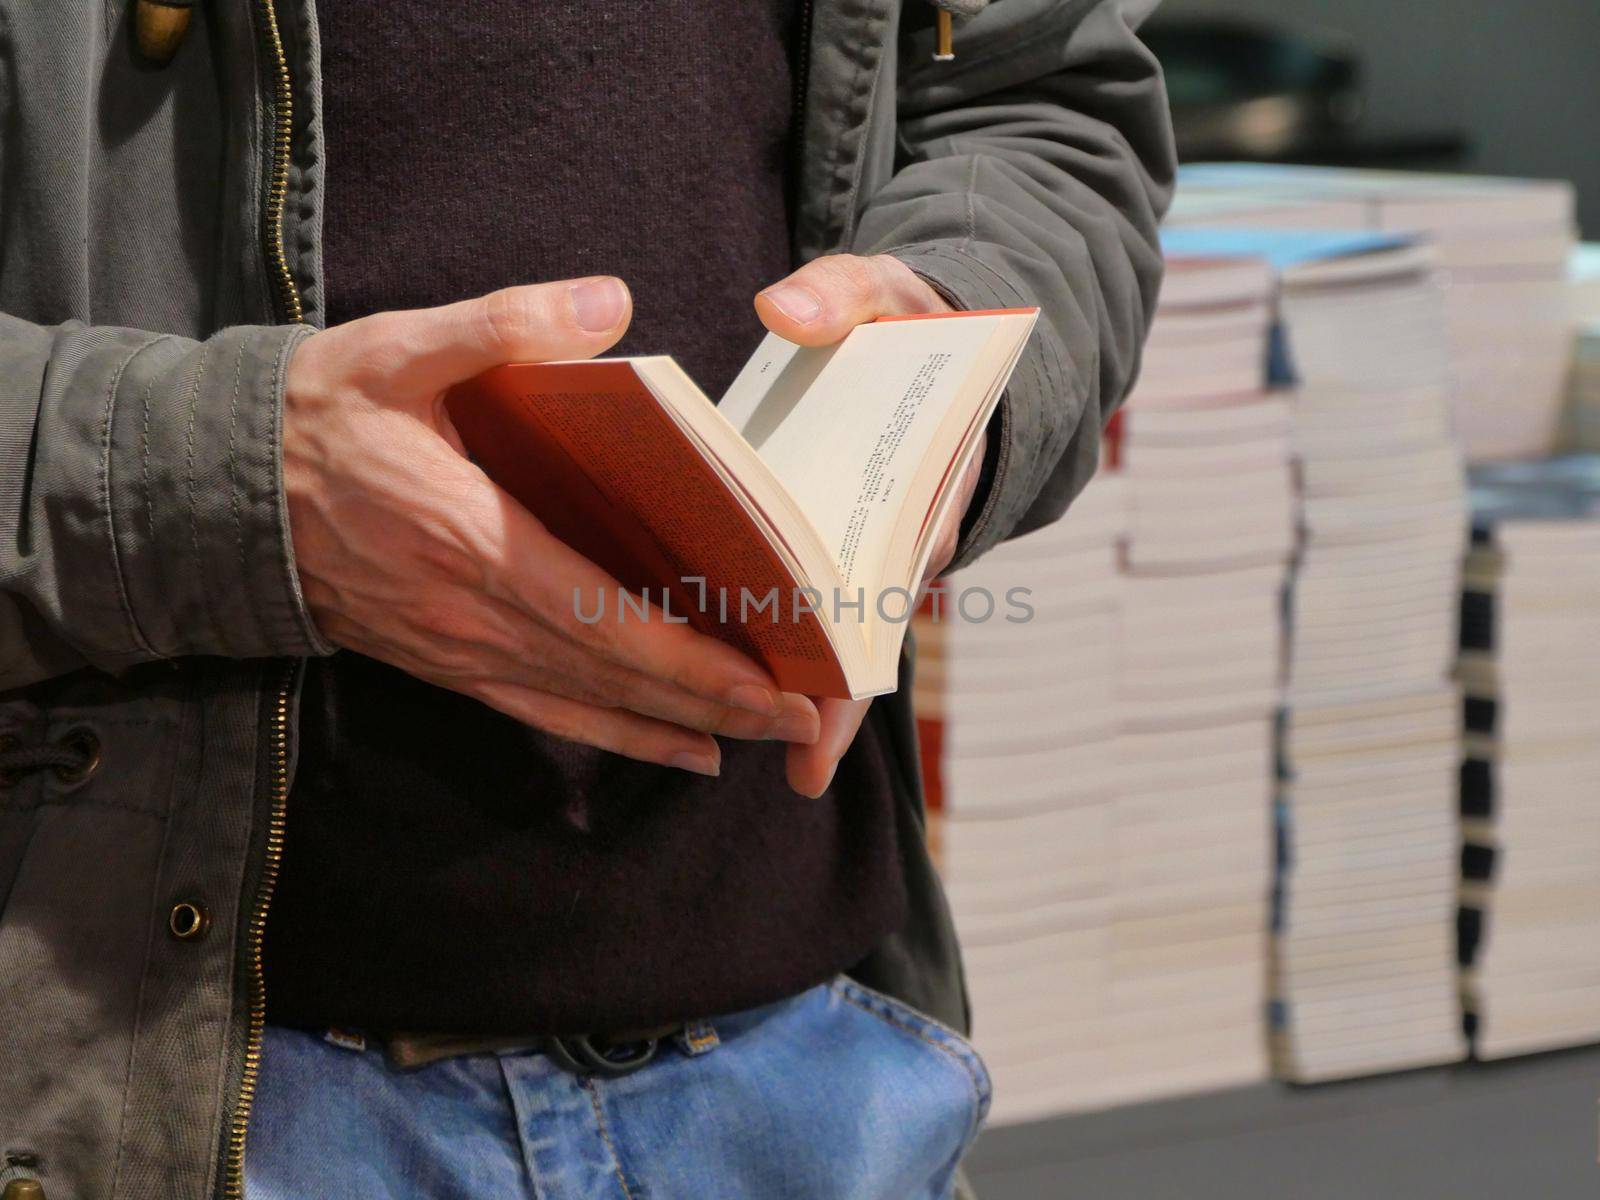 Male hands holding an open book close up view Turin Italy May 10 2019 by lemar